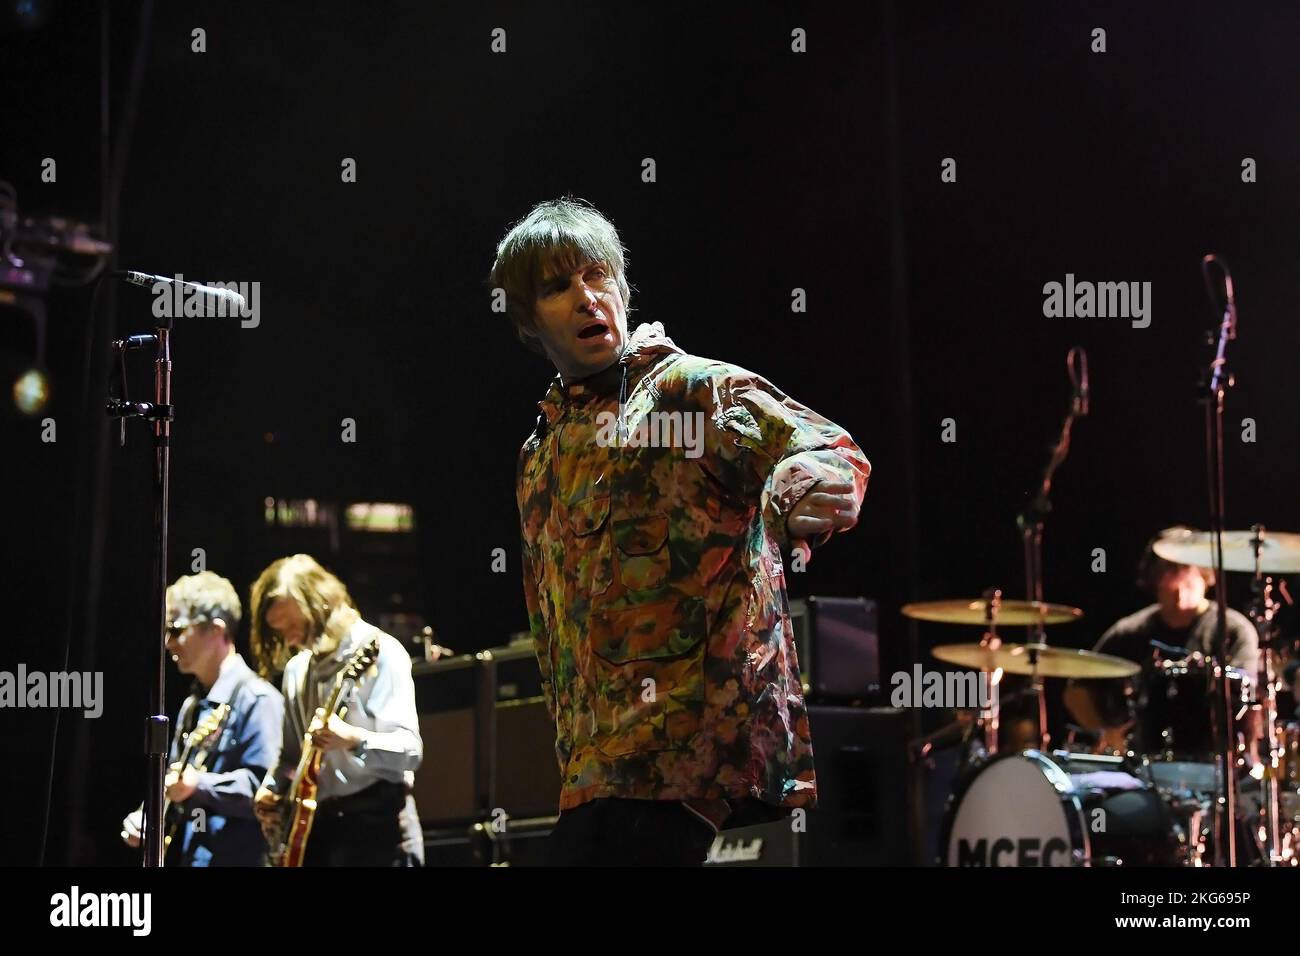 Rio de Janeiro,November 16, 2022.Singer Liam Gallagher former vocalist of the band Oasis, during a show at Qualistage in the city of Rio de Janeiro Stock Photo